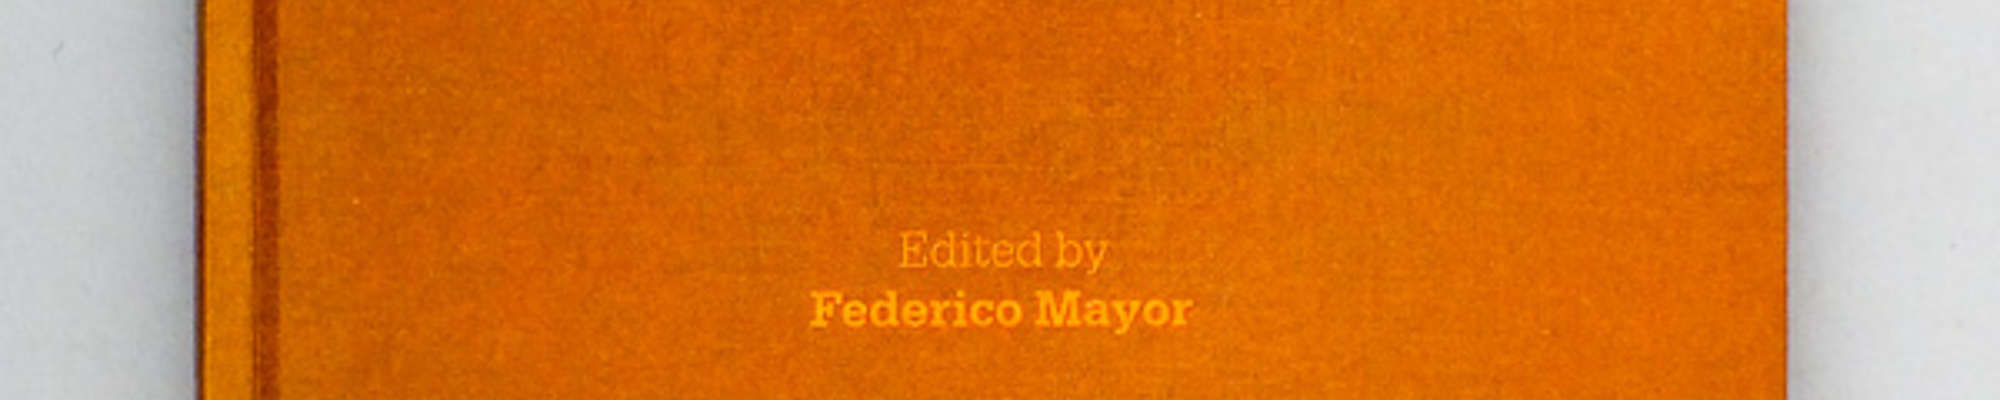 SCIENTIFIC RESEARCH AND NEW GOALS, toward a new model (Federico Mayor)